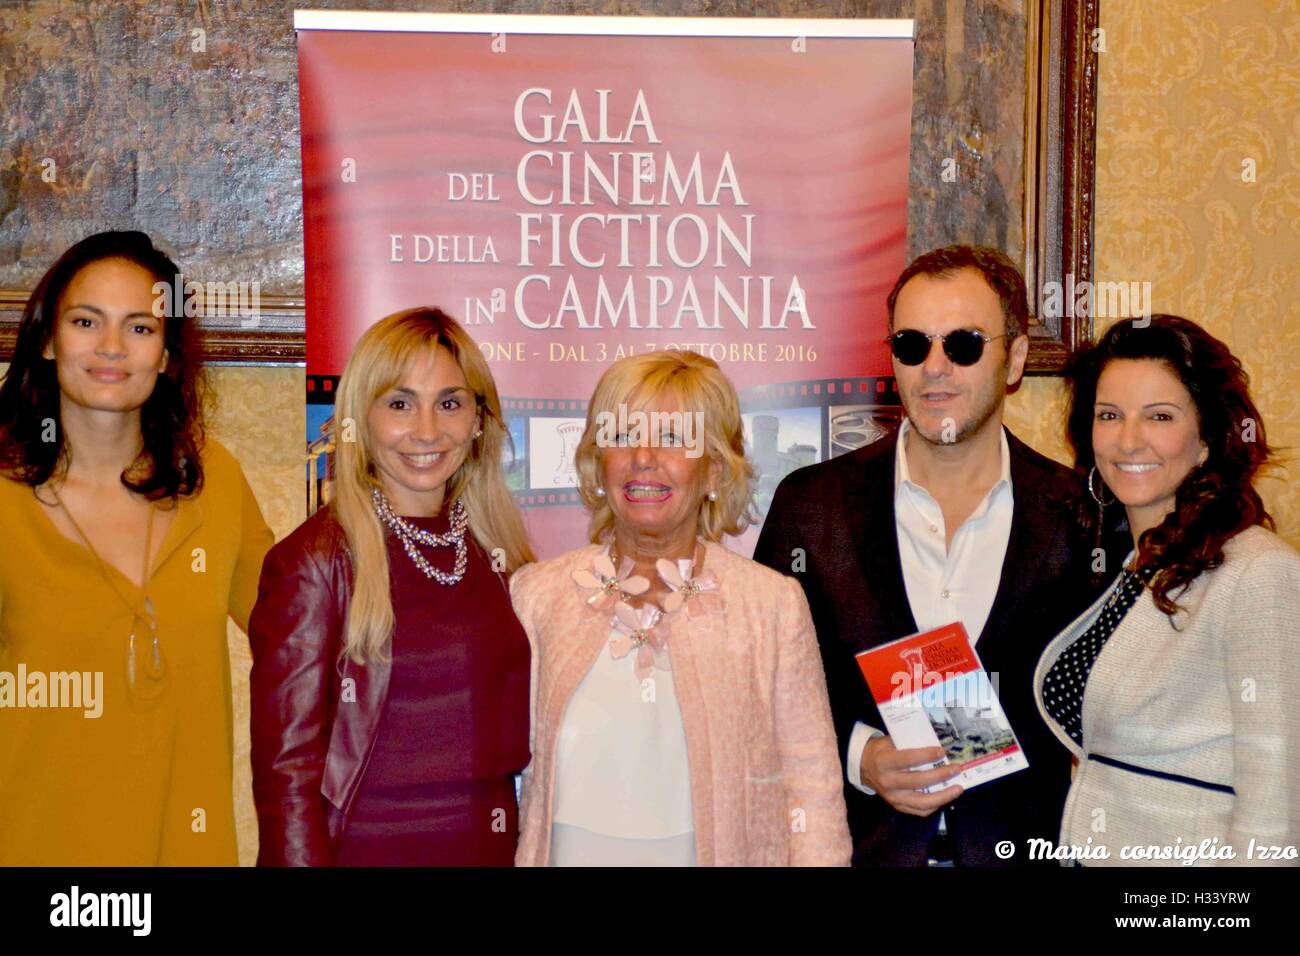 Naples, Italy. 03rd Oct, 2016. The press conference to present the eighth edition of 'Gala Cinema Fiction' was held this morning in Naples (at the headquarters of the Industrial Union). The event will take place in Campania (Castellammare di Stabia) October 3 to 7. The festival was conceived and produced by Valeria Della Rocca, under the artistic direction of Marco Spagnoli. The event has the objective of enhancing the artistic and natural resources of the Campania Region. © Maria Consiglia Izzo/Pacific Press/Alamy Live News Stock Photo